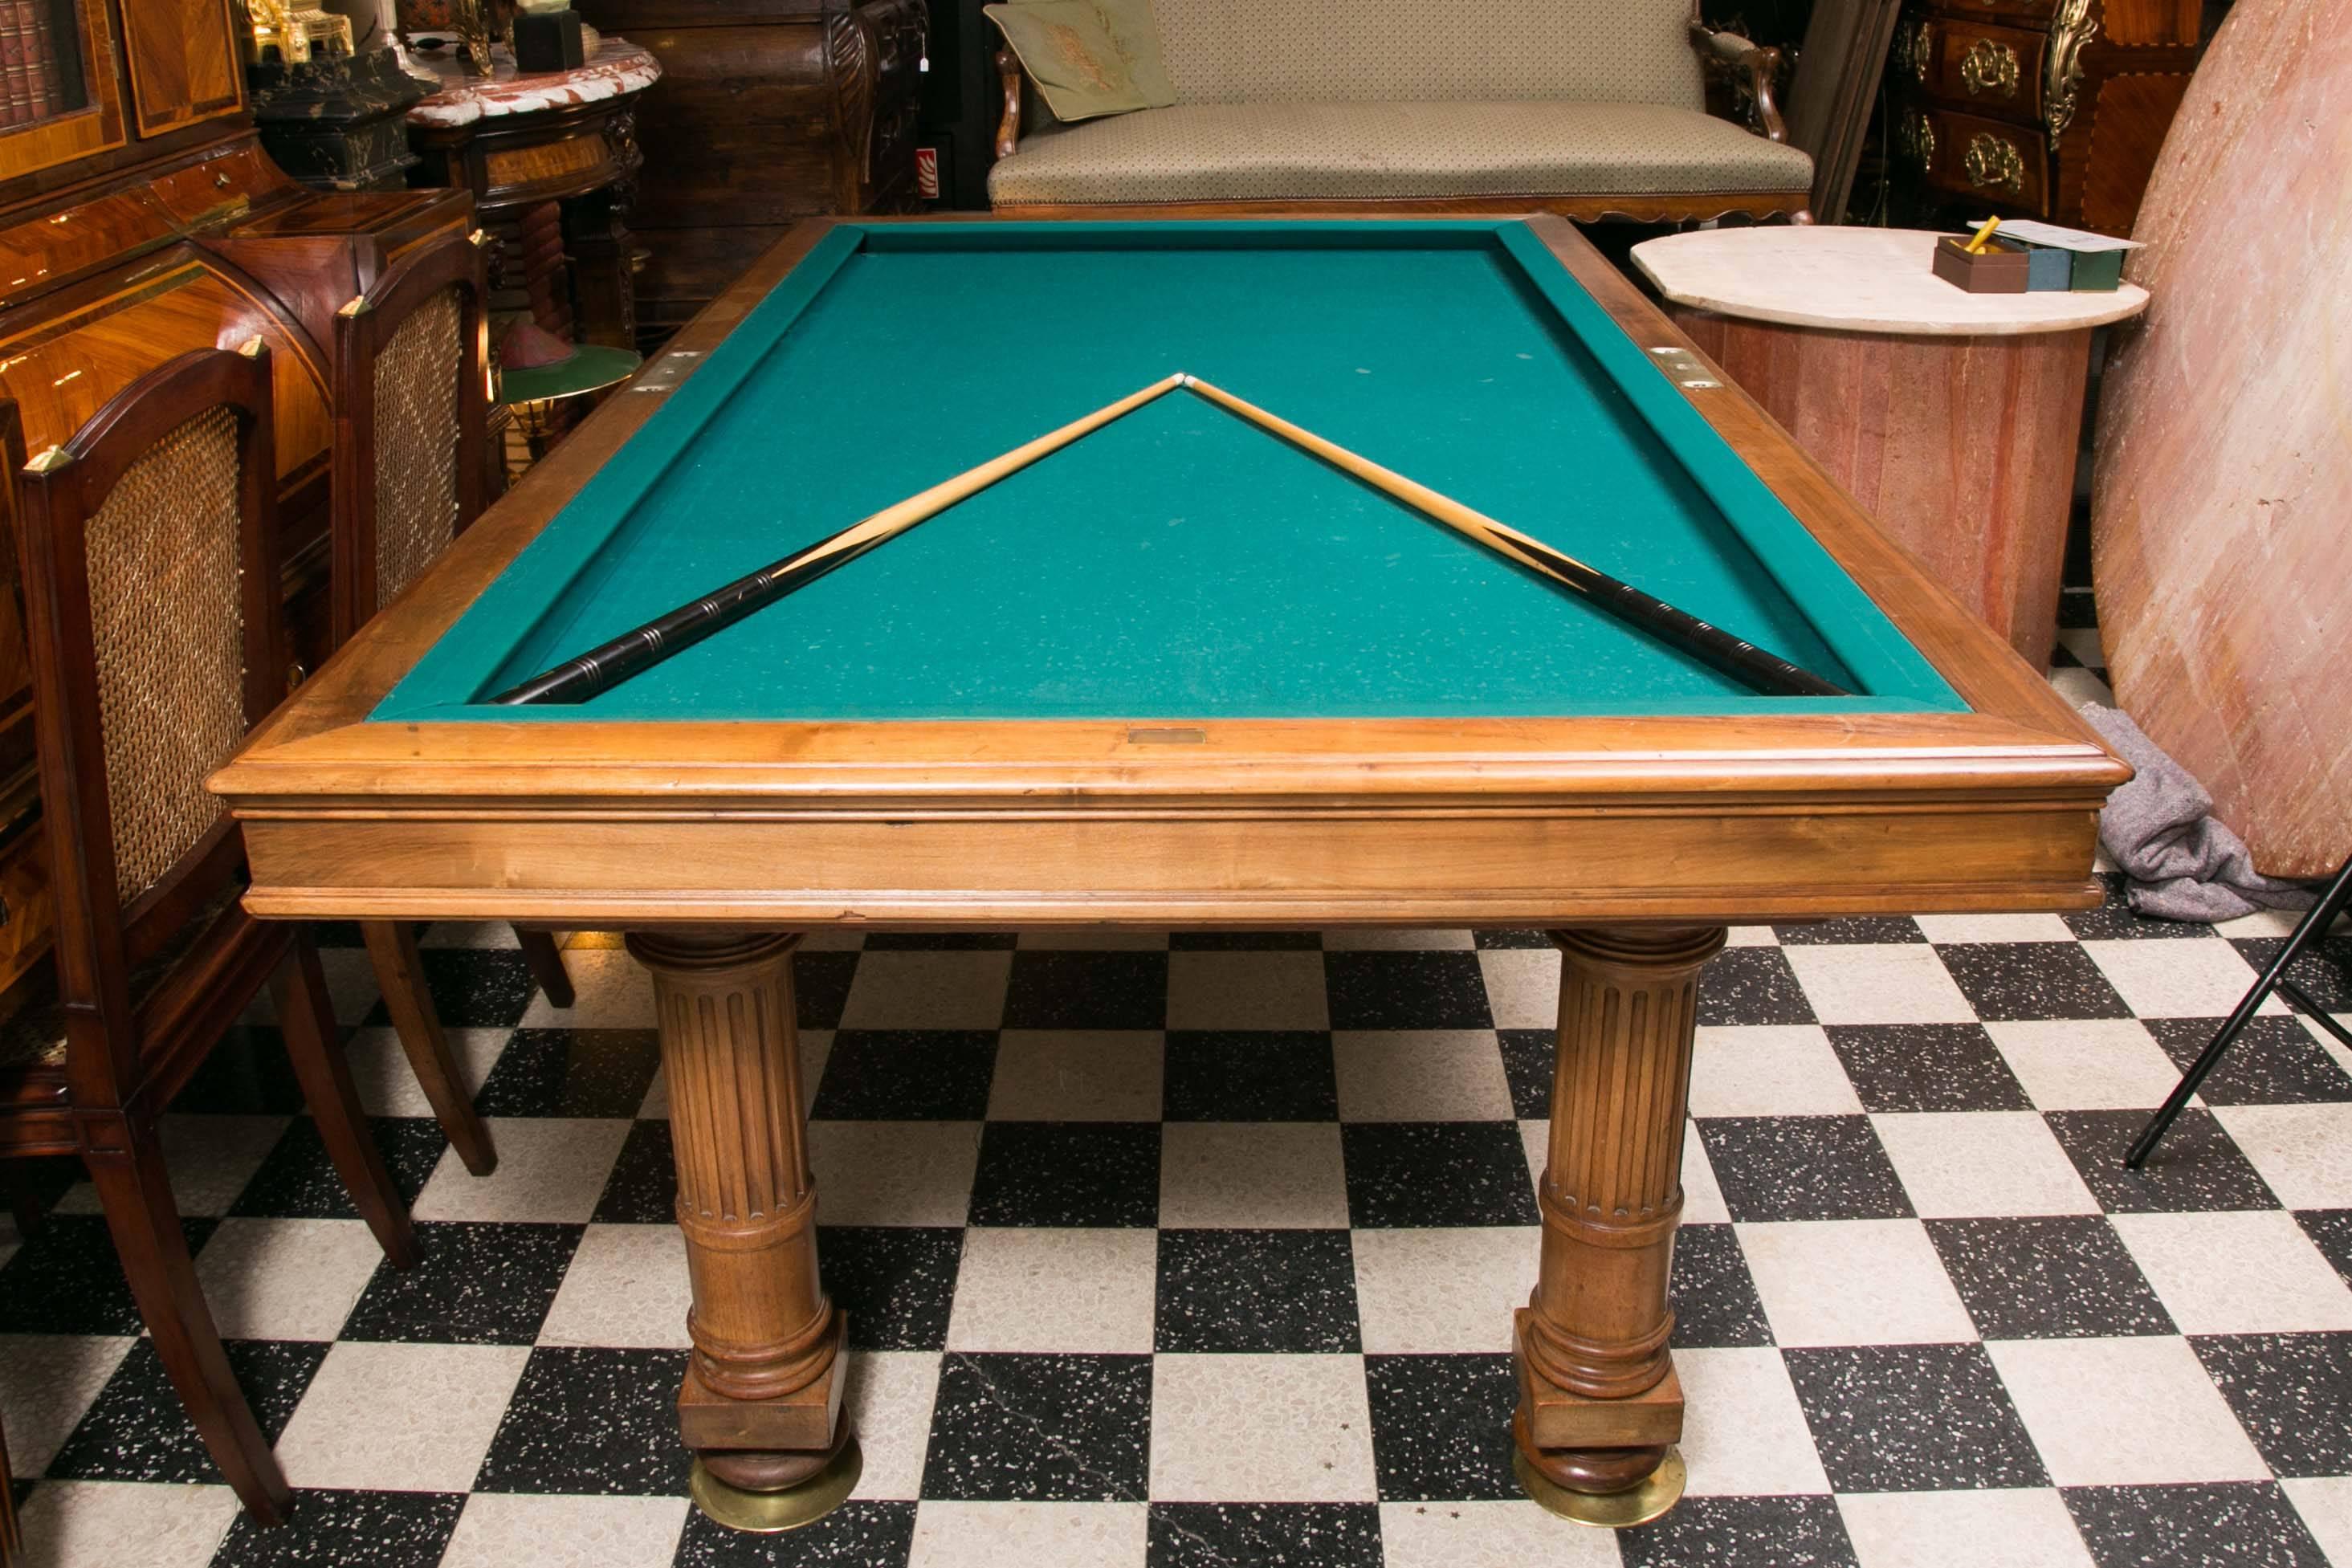 Early 20th Century French Billiard Games Table from the Beginning of the 20th Century